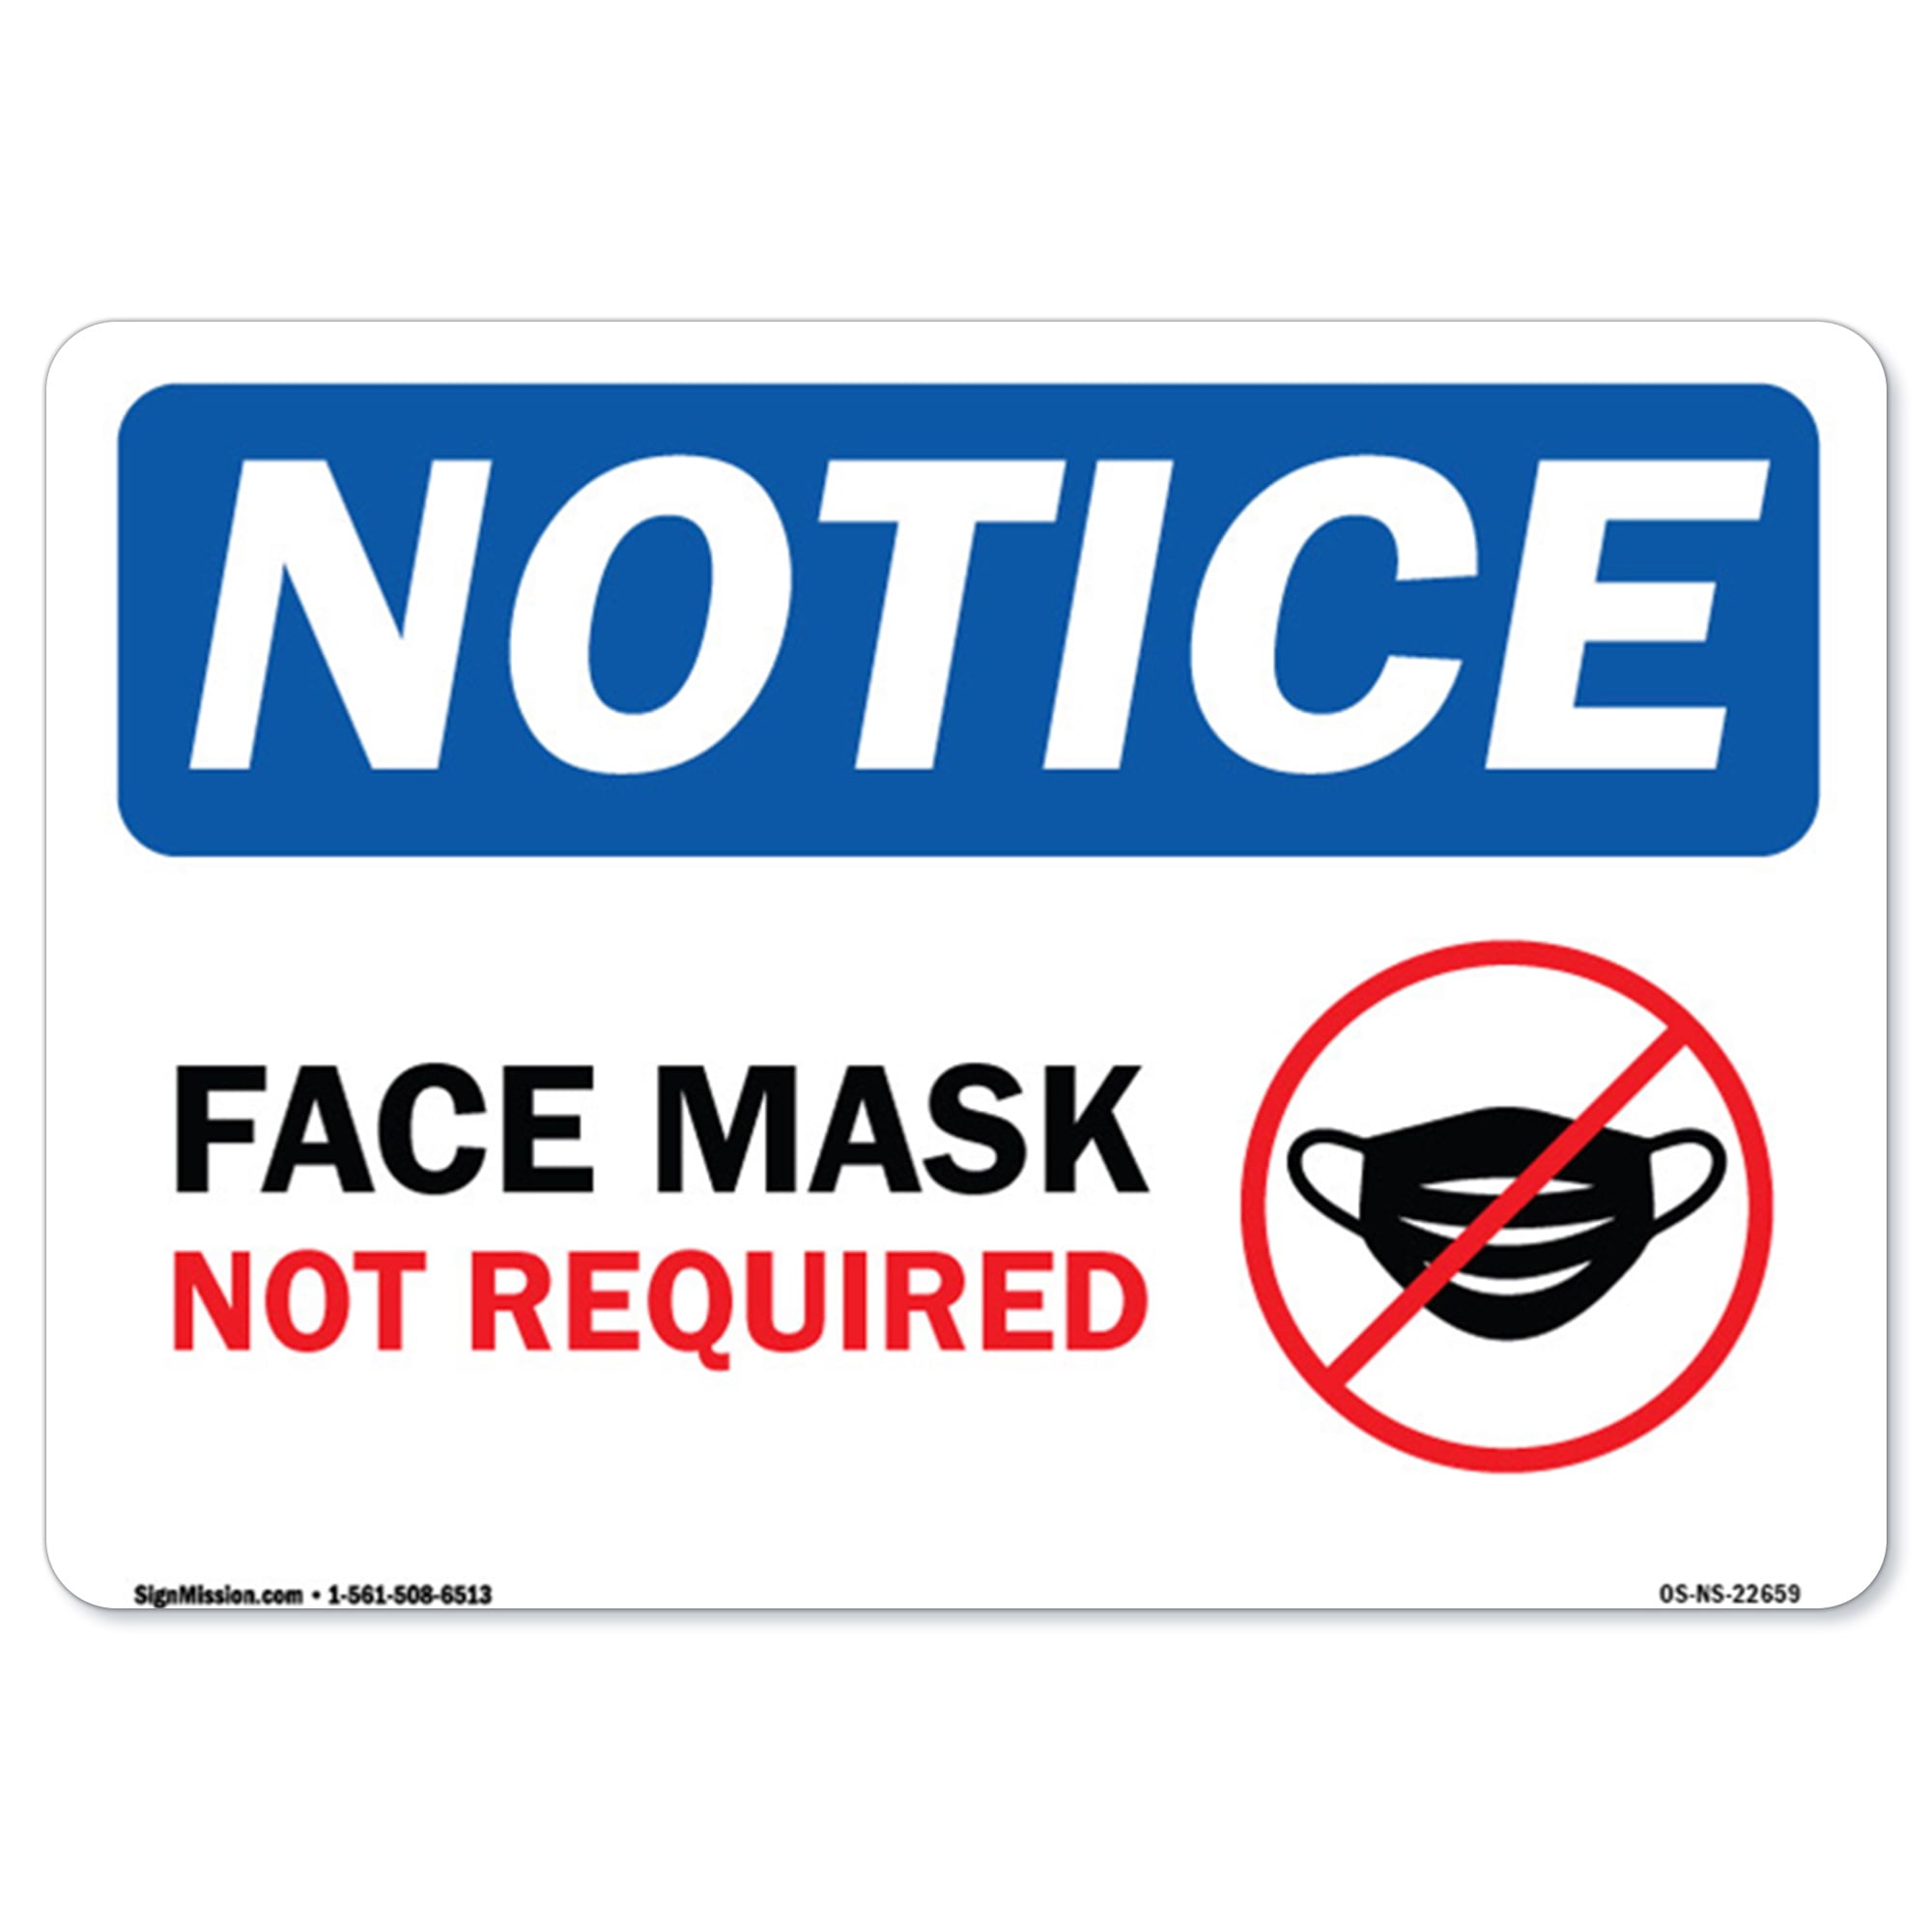 LARGE Face Mask Covering Must Be Worn Required Sign Guidance Notice Sticker 